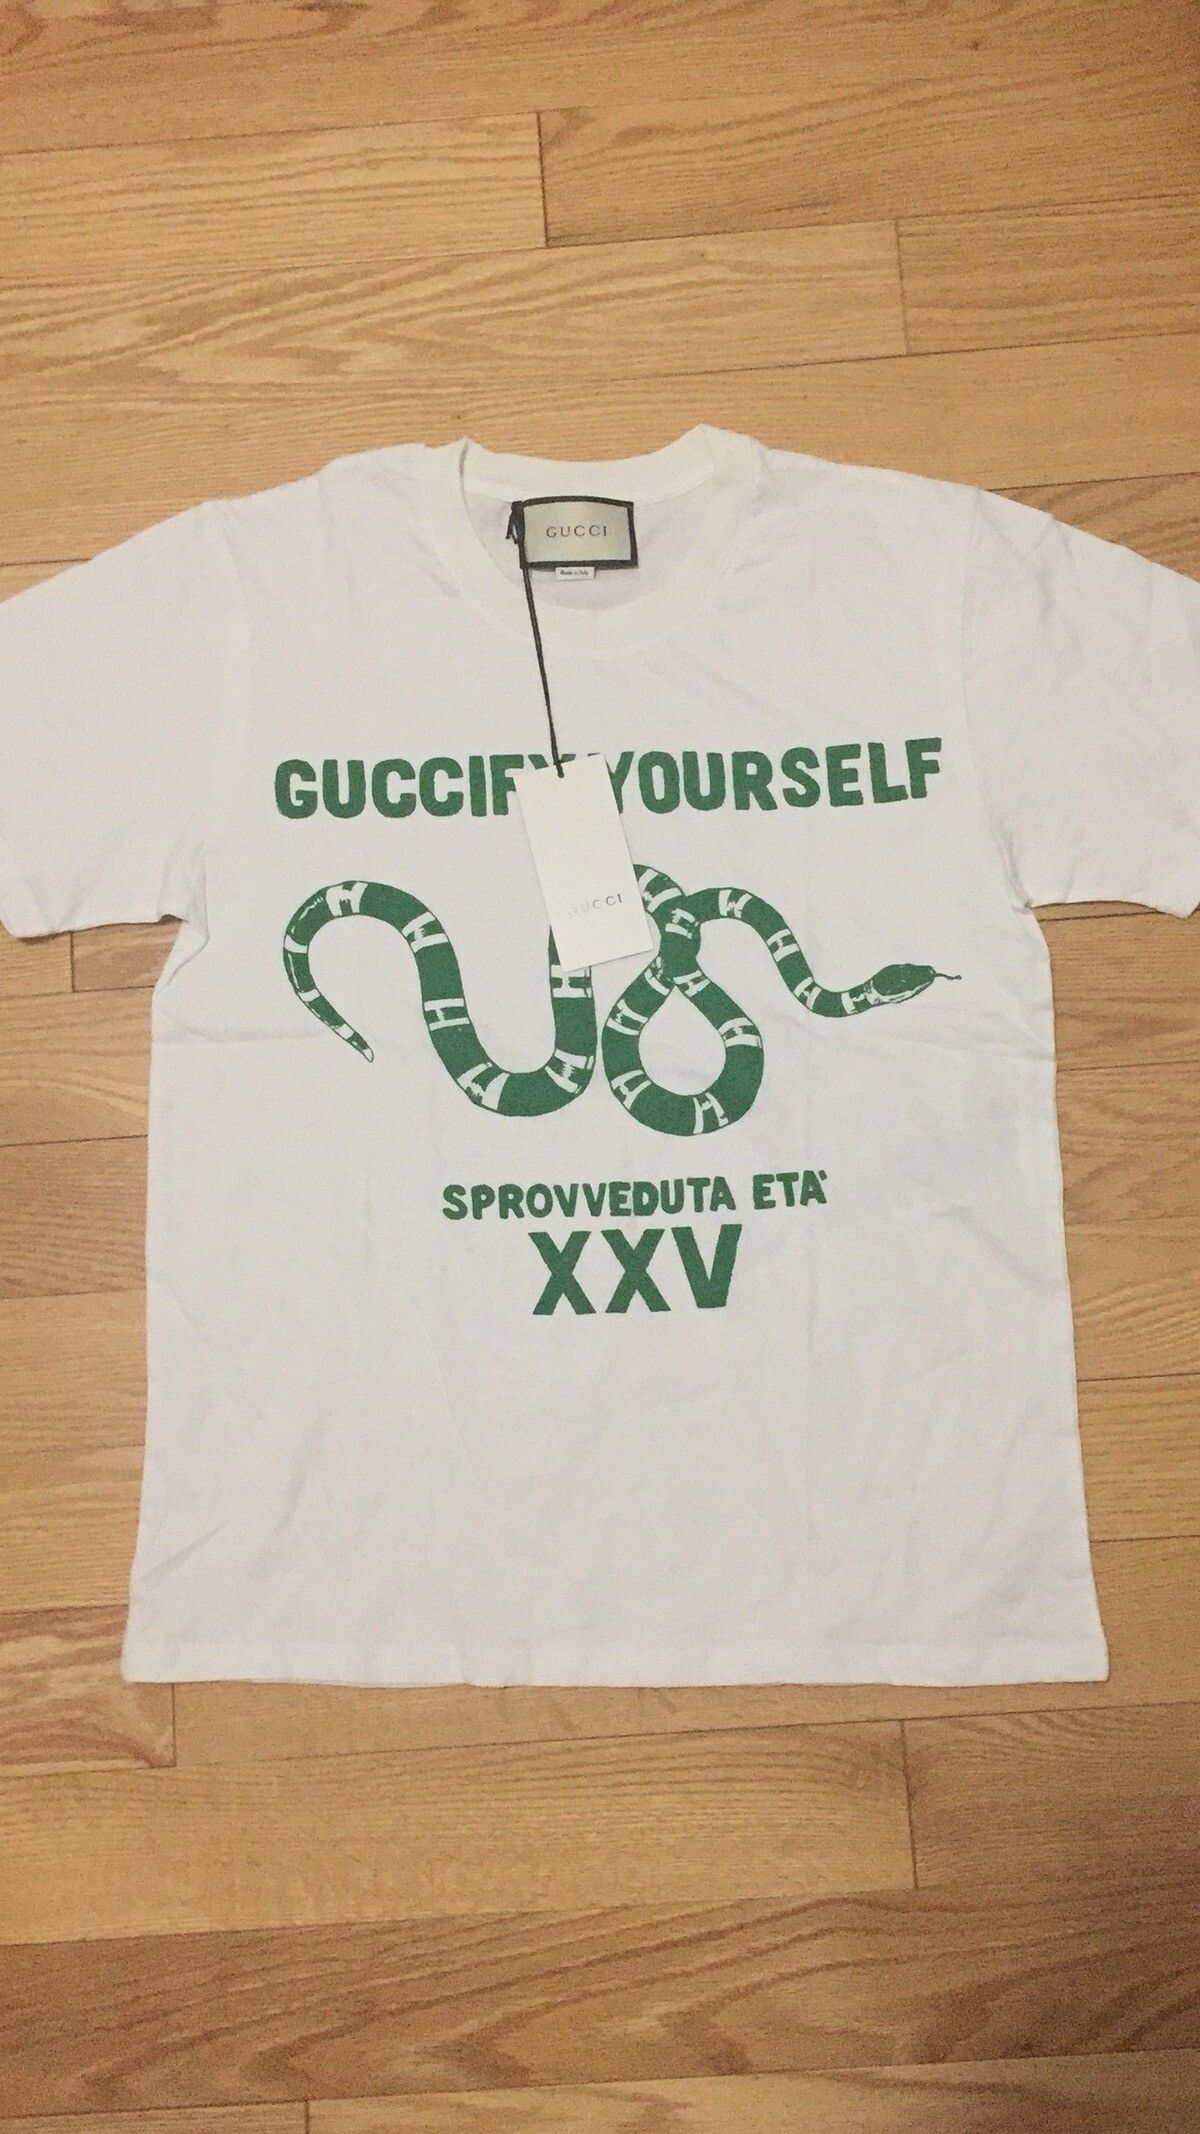 Gucci Gucci Guccify Yourself Tee Shirt | Grailed